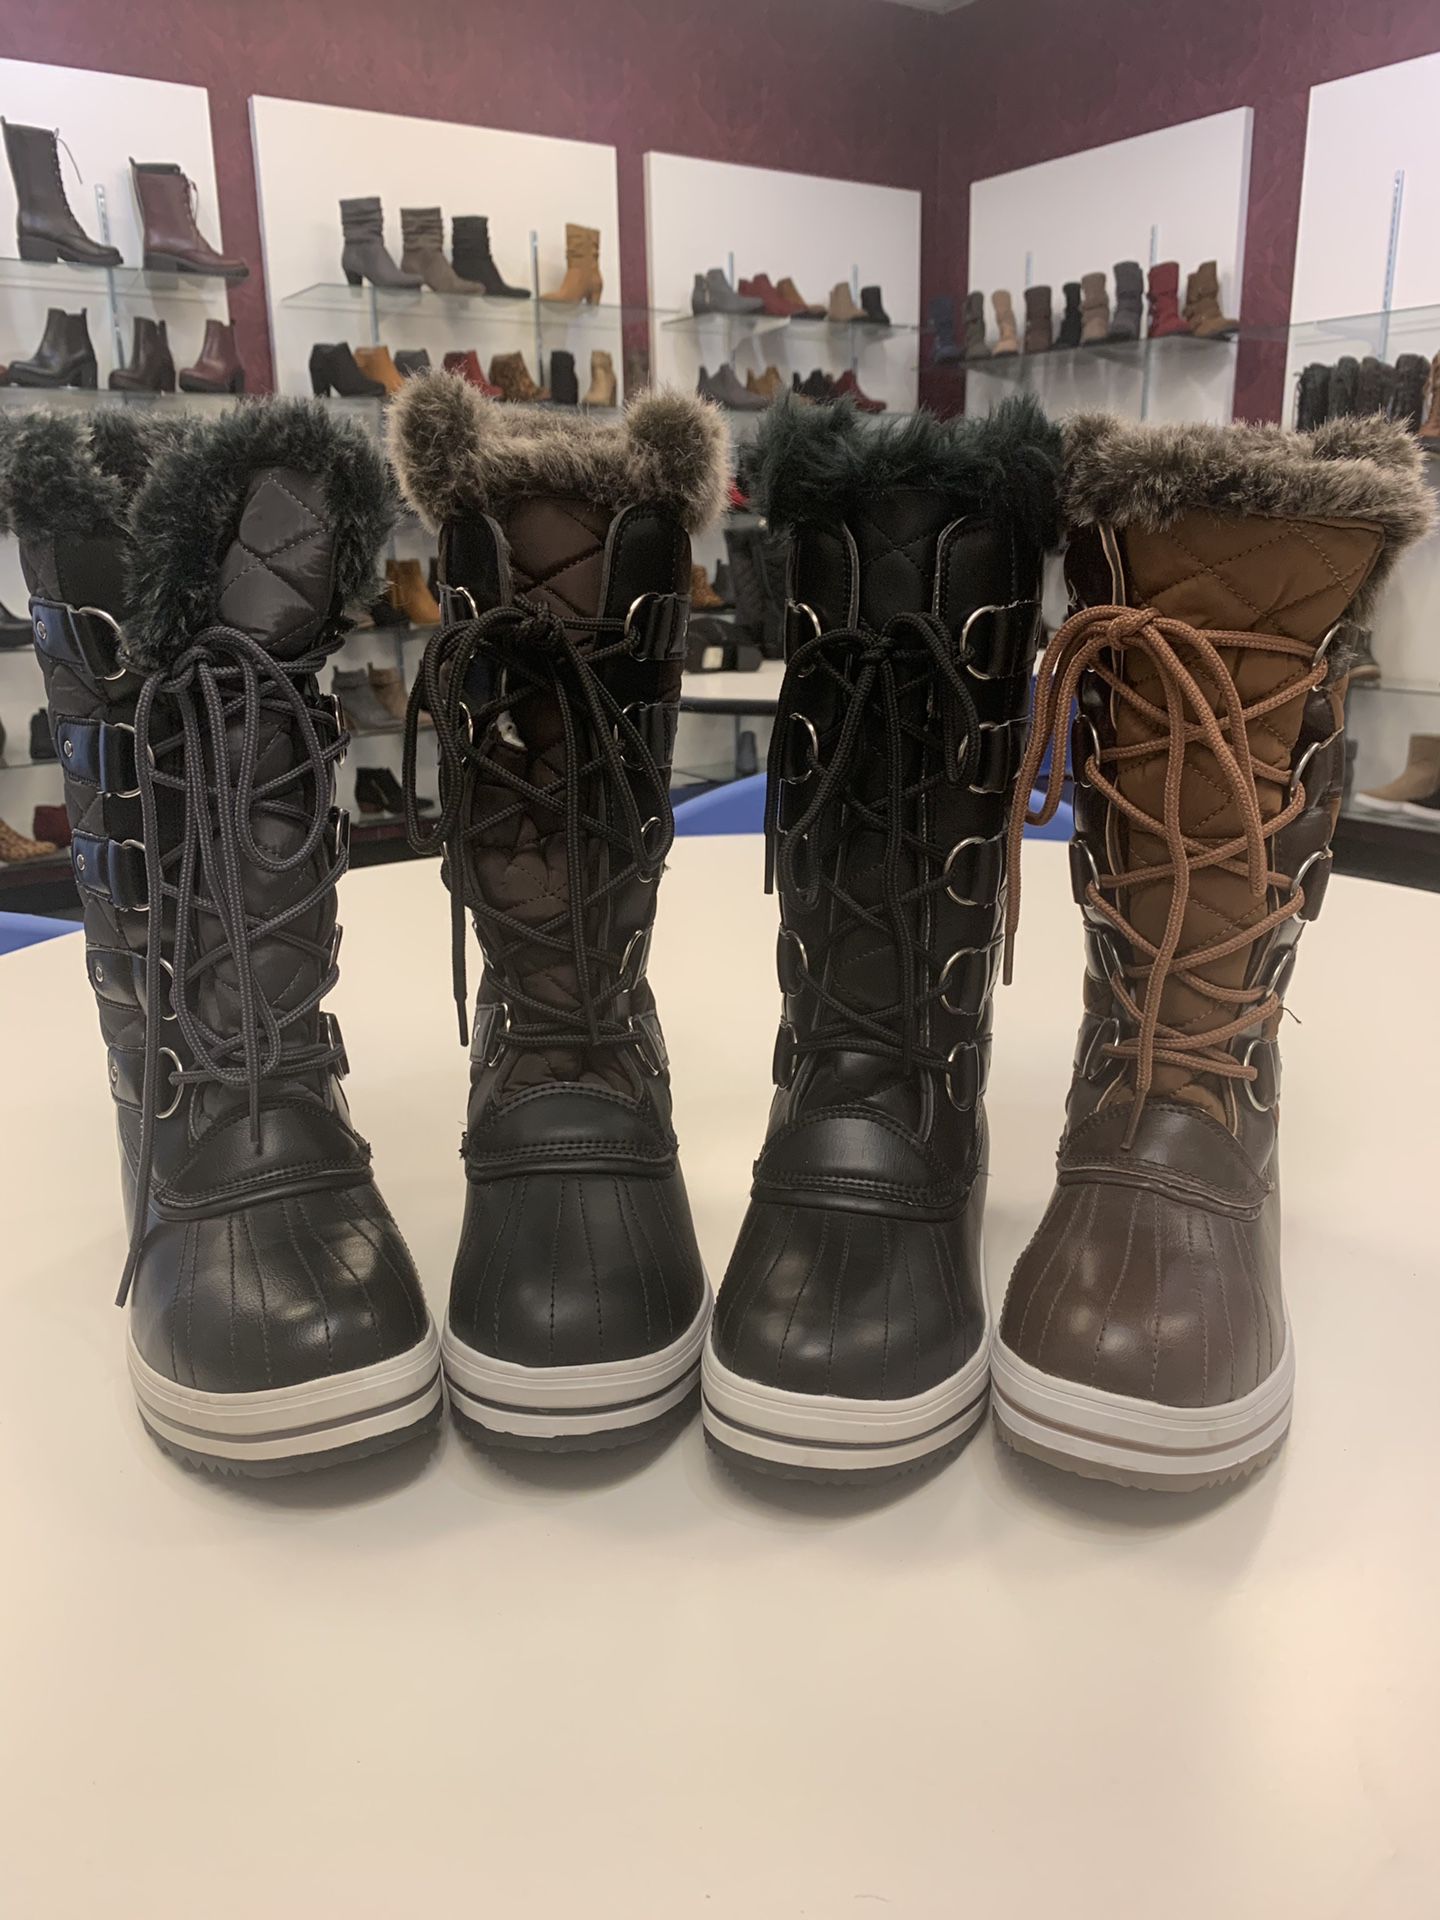 Snow boots for women sizes available 5.5 6, 6.5, 7, 7.5, 8, 8.5 , 9, 10